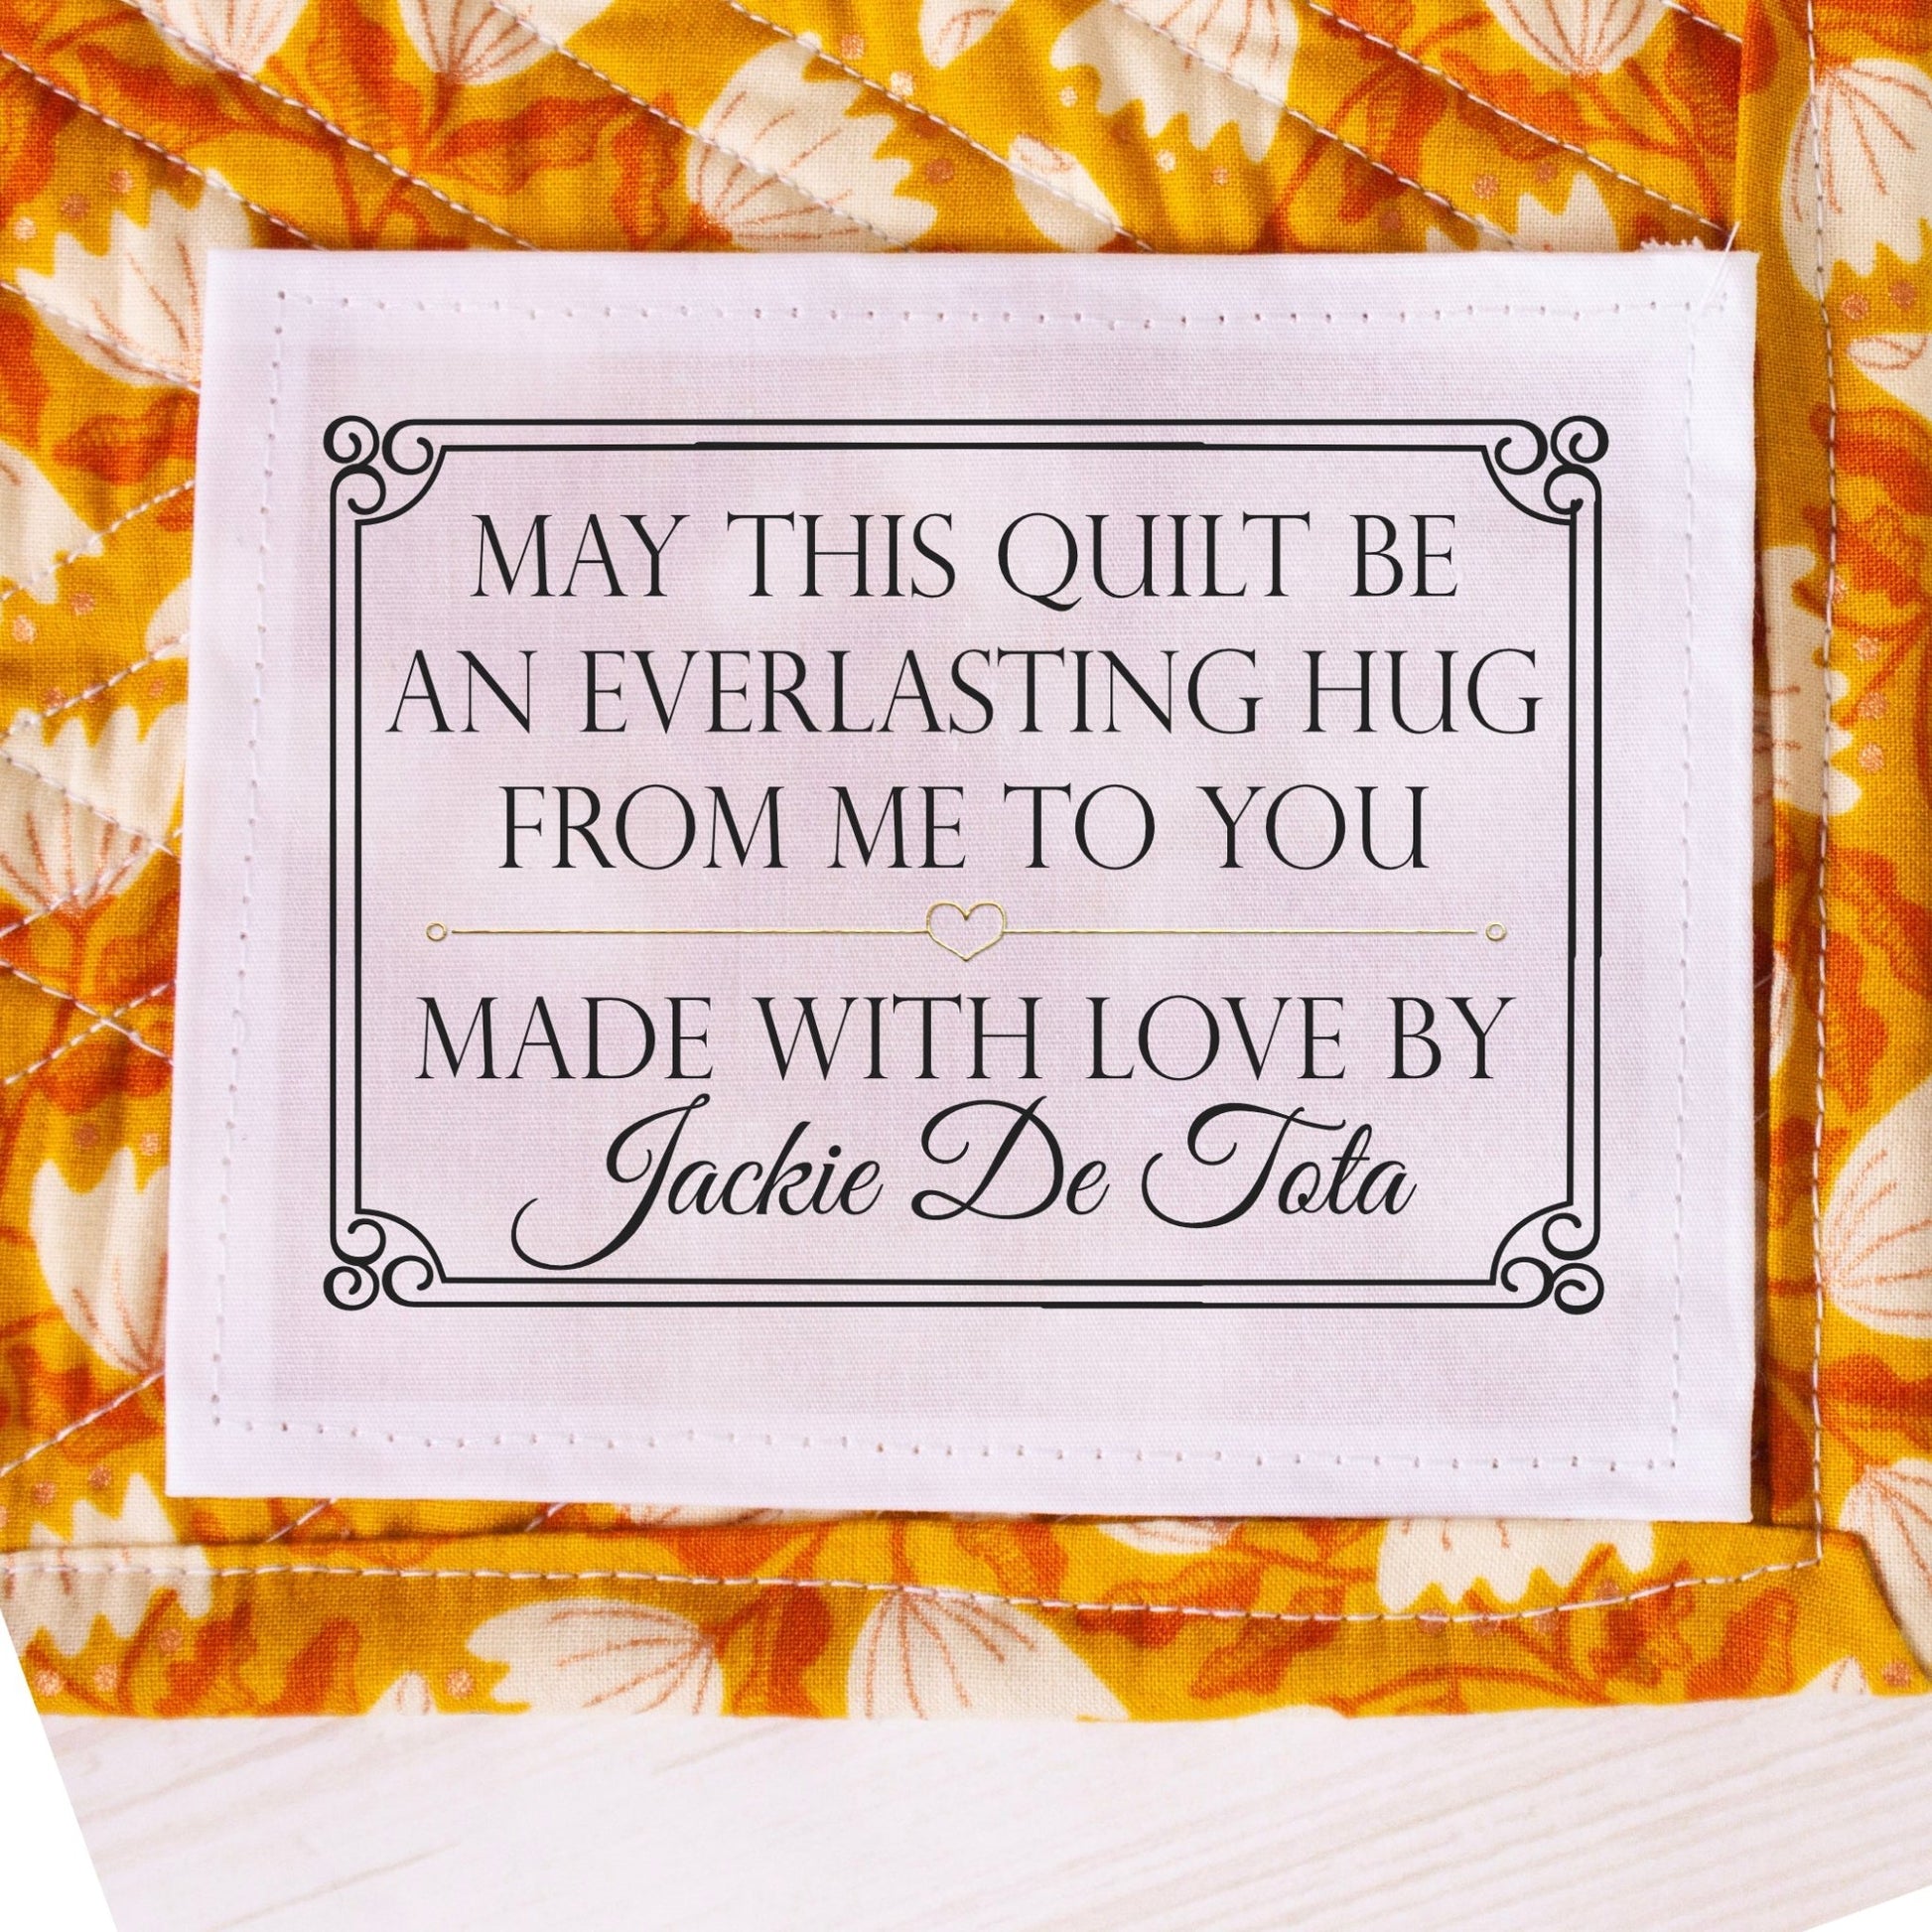 May this quilt be an everlasting hug from. me to you. Personalized, sentimental quilt labels - Jammin Threads